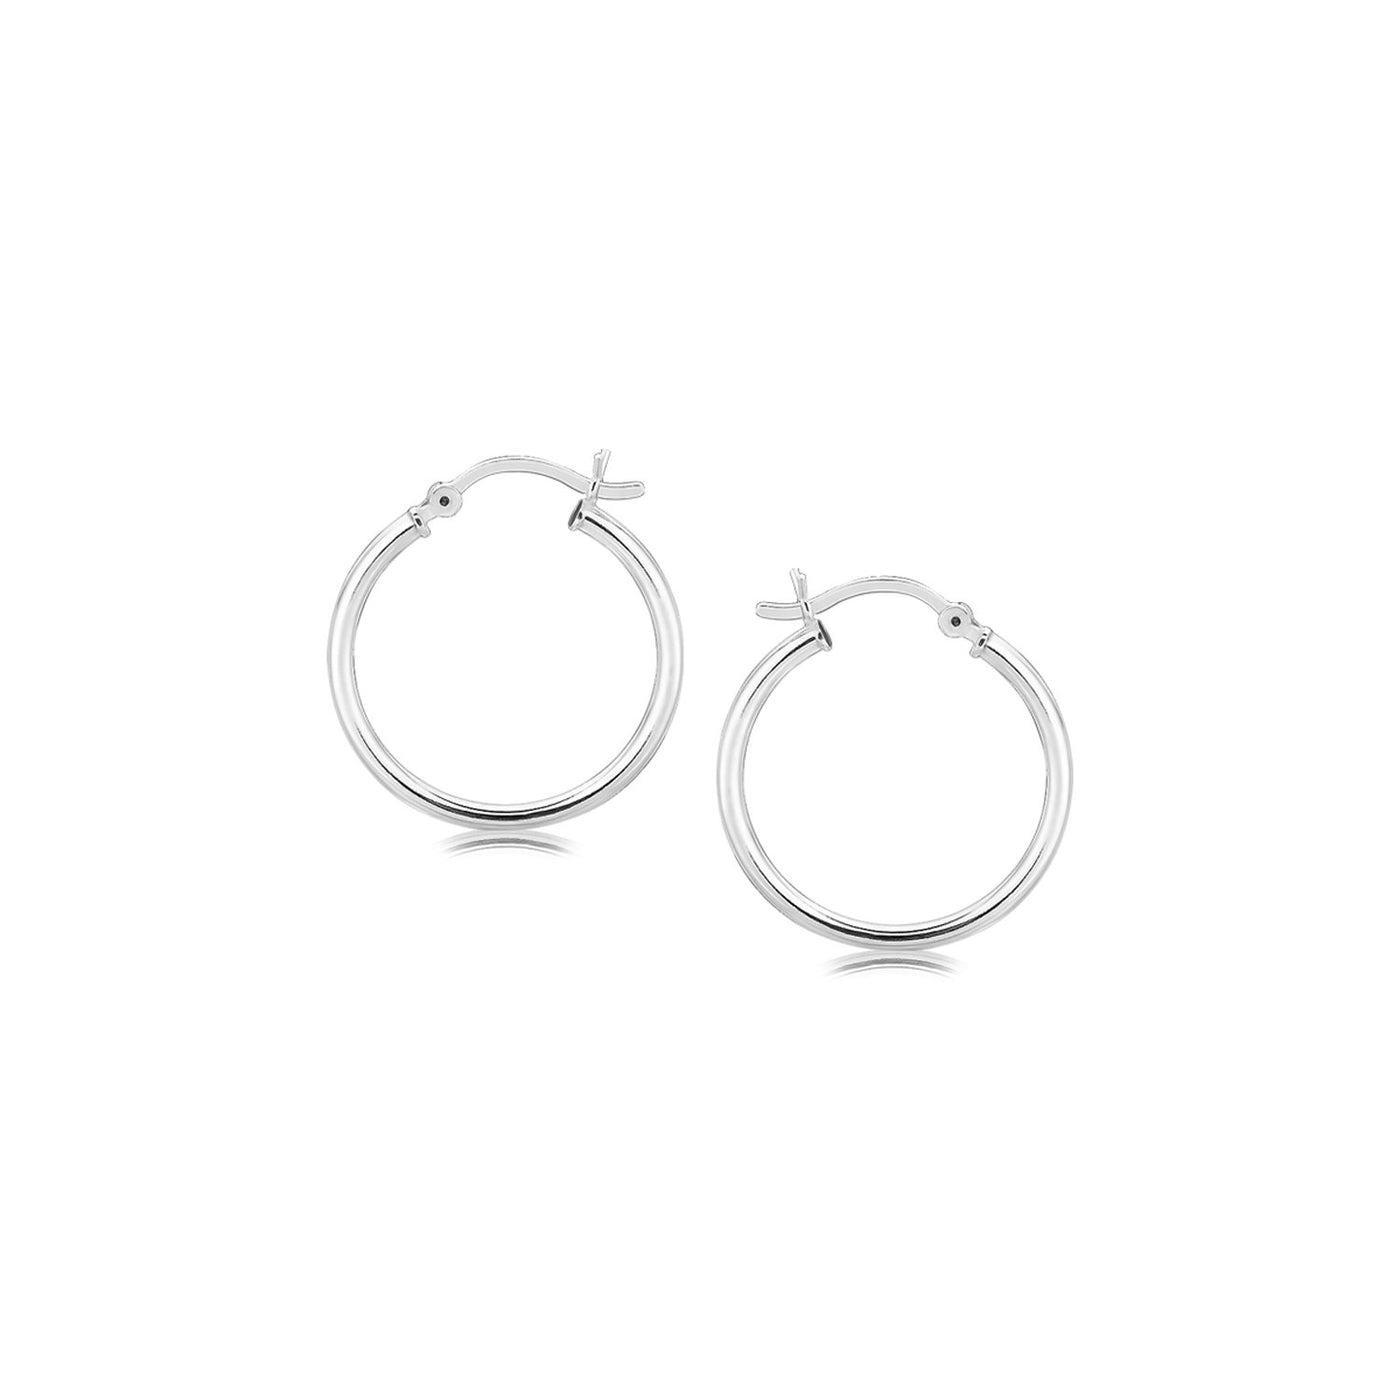 Polished Sterling Silver and Rhodium Plated Hoop Earrings (20mm)